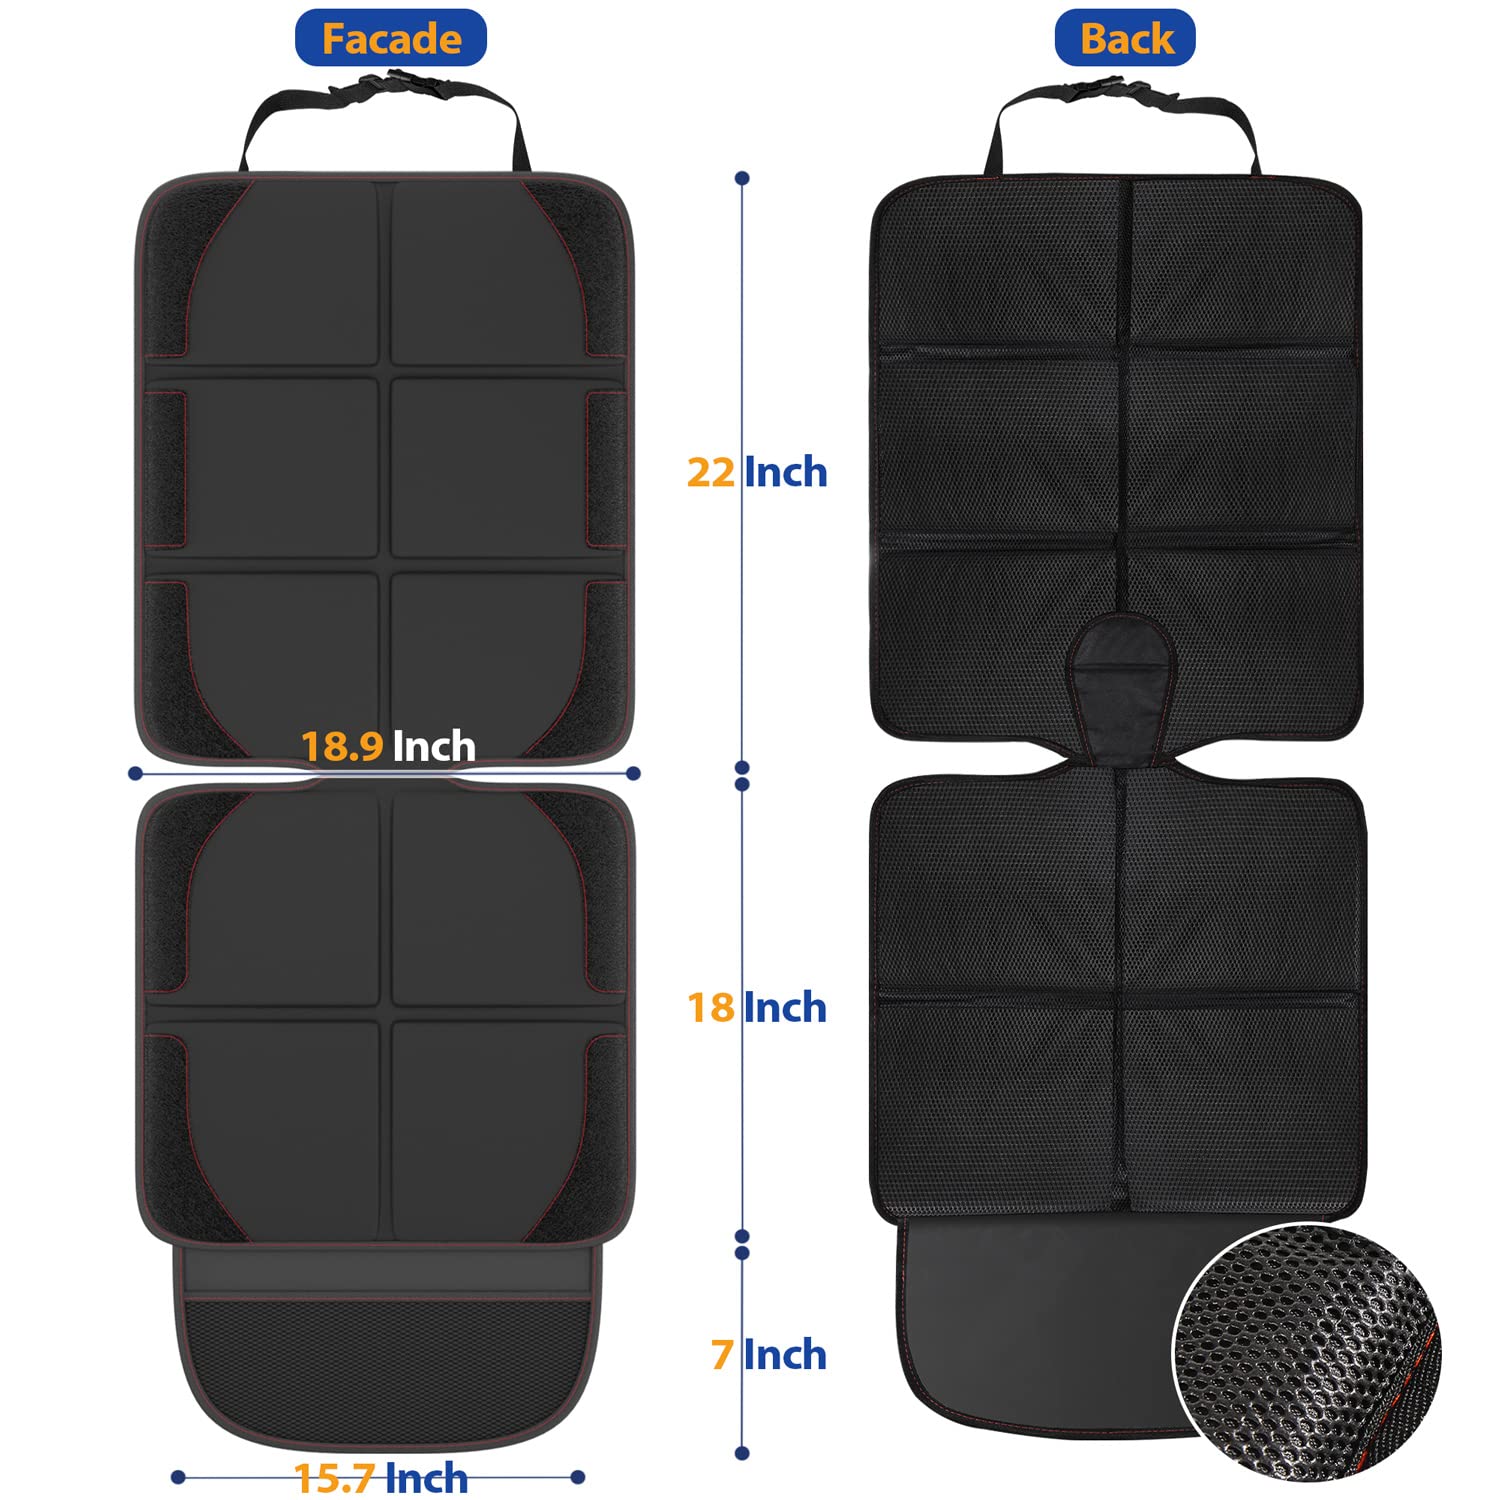 Gimars 2 Packs XL 5-Layer EPE Padding Car Seat Protector for Child Seat, Waterproof 600D Fabric with Nonslip Backing,Storage Pockets SUV, Sedan, Truck, Leather Seats